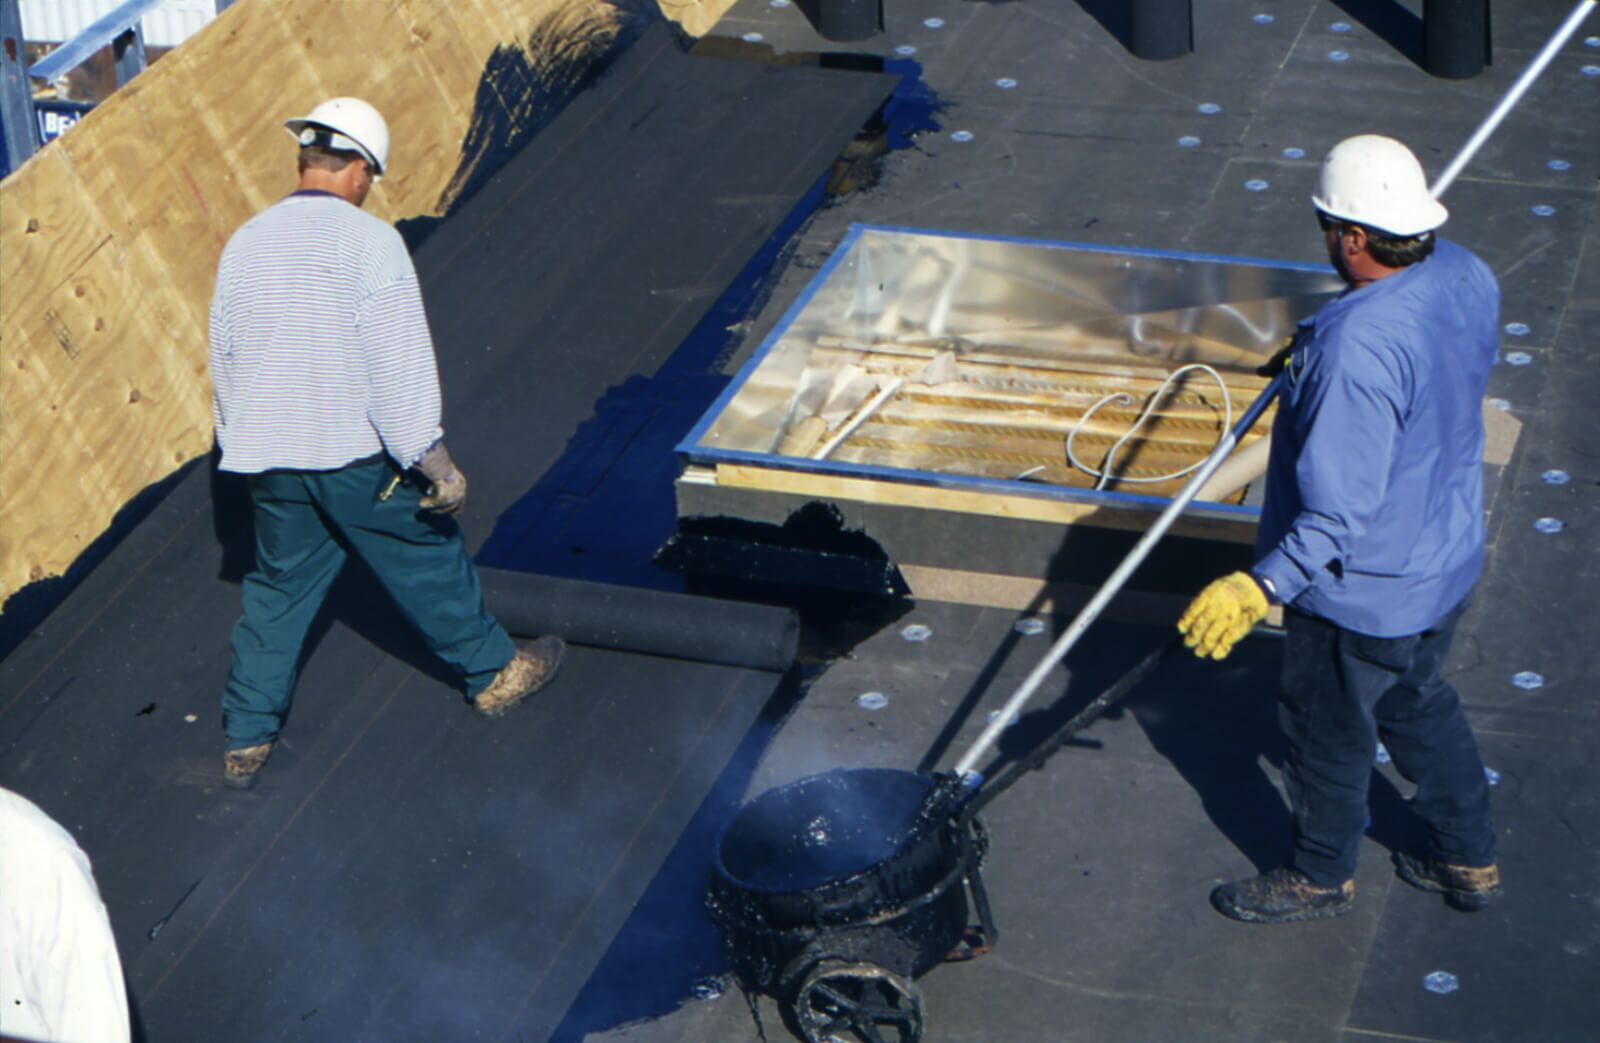 the base sheet being installed for a commercial roofing job